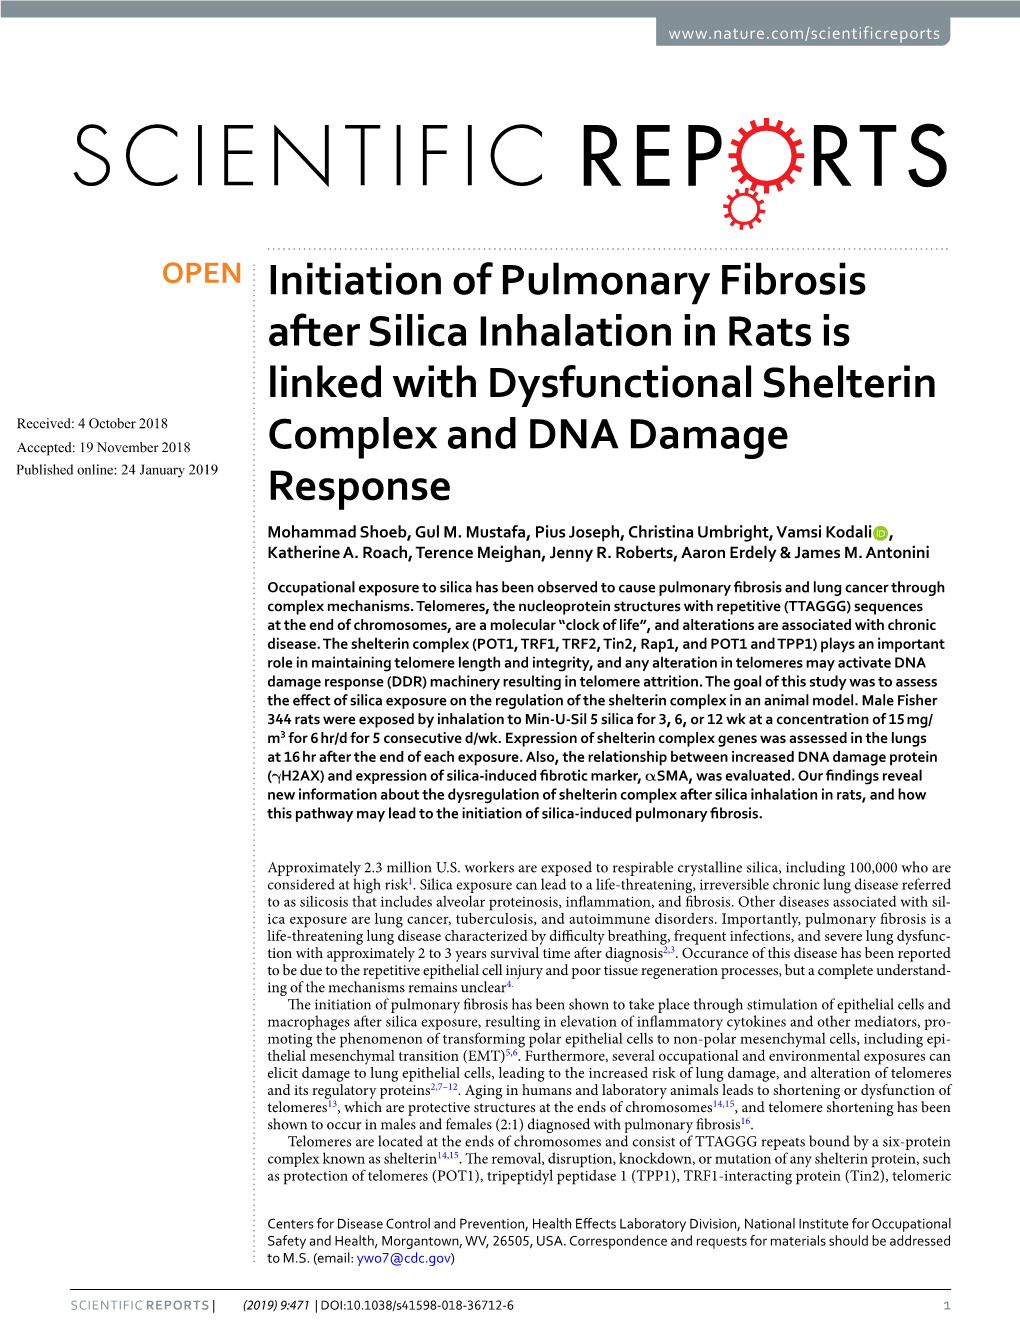 Initiation of Pulmonary Fibrosis After Silica Inhalation in Rats Is Linked